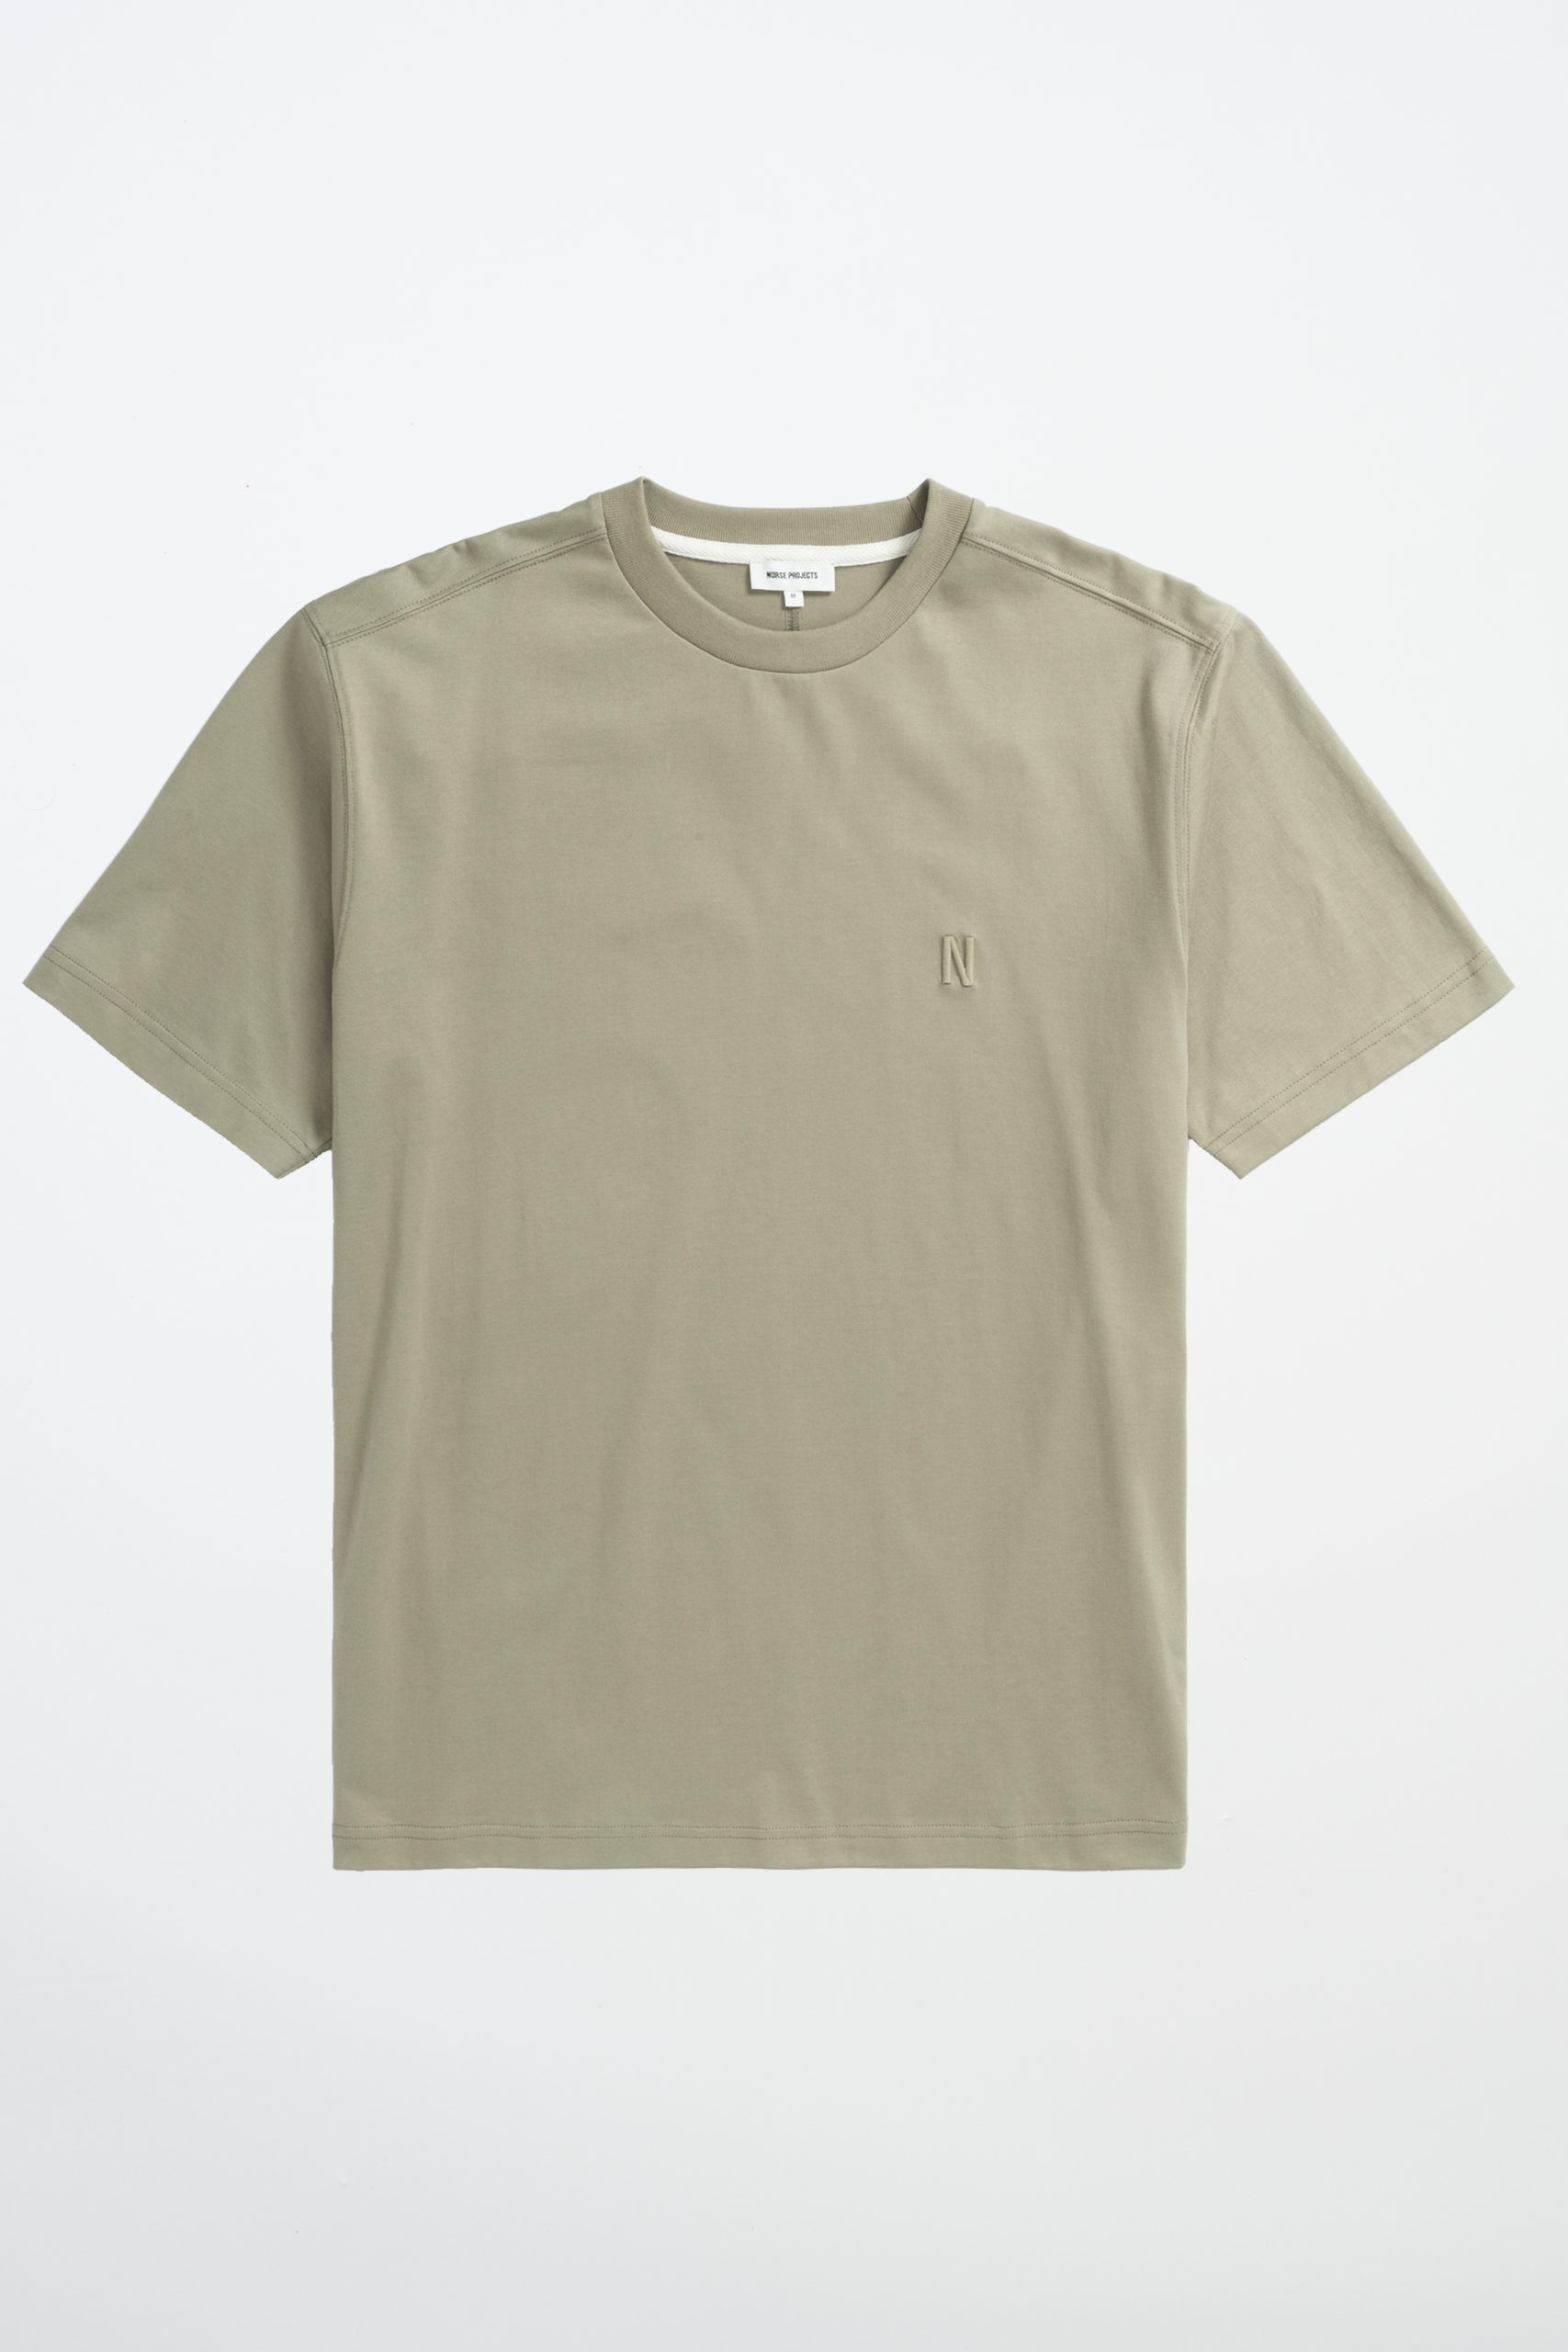 NORSE PROJECTS JOHANNES N LOGO Clay